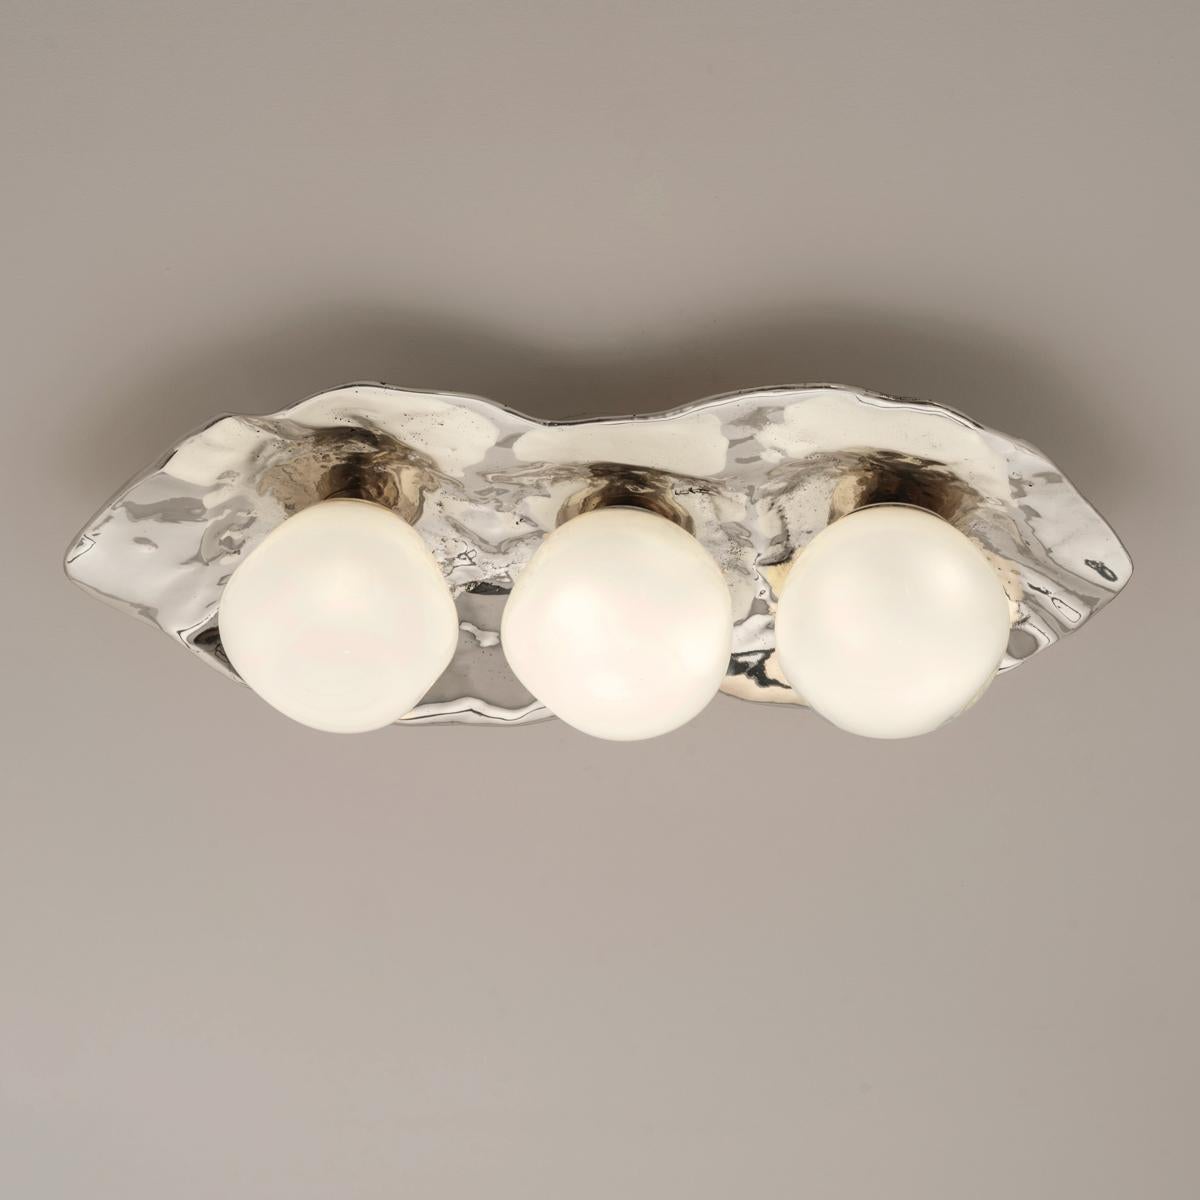 The Shell ceiling light is forged from brass to create an organic shell nestling three of our handblown Sfera glasses made in Murano.

Shown in the primary images in polished nickel-subsequent pictures show the fixture in other featured